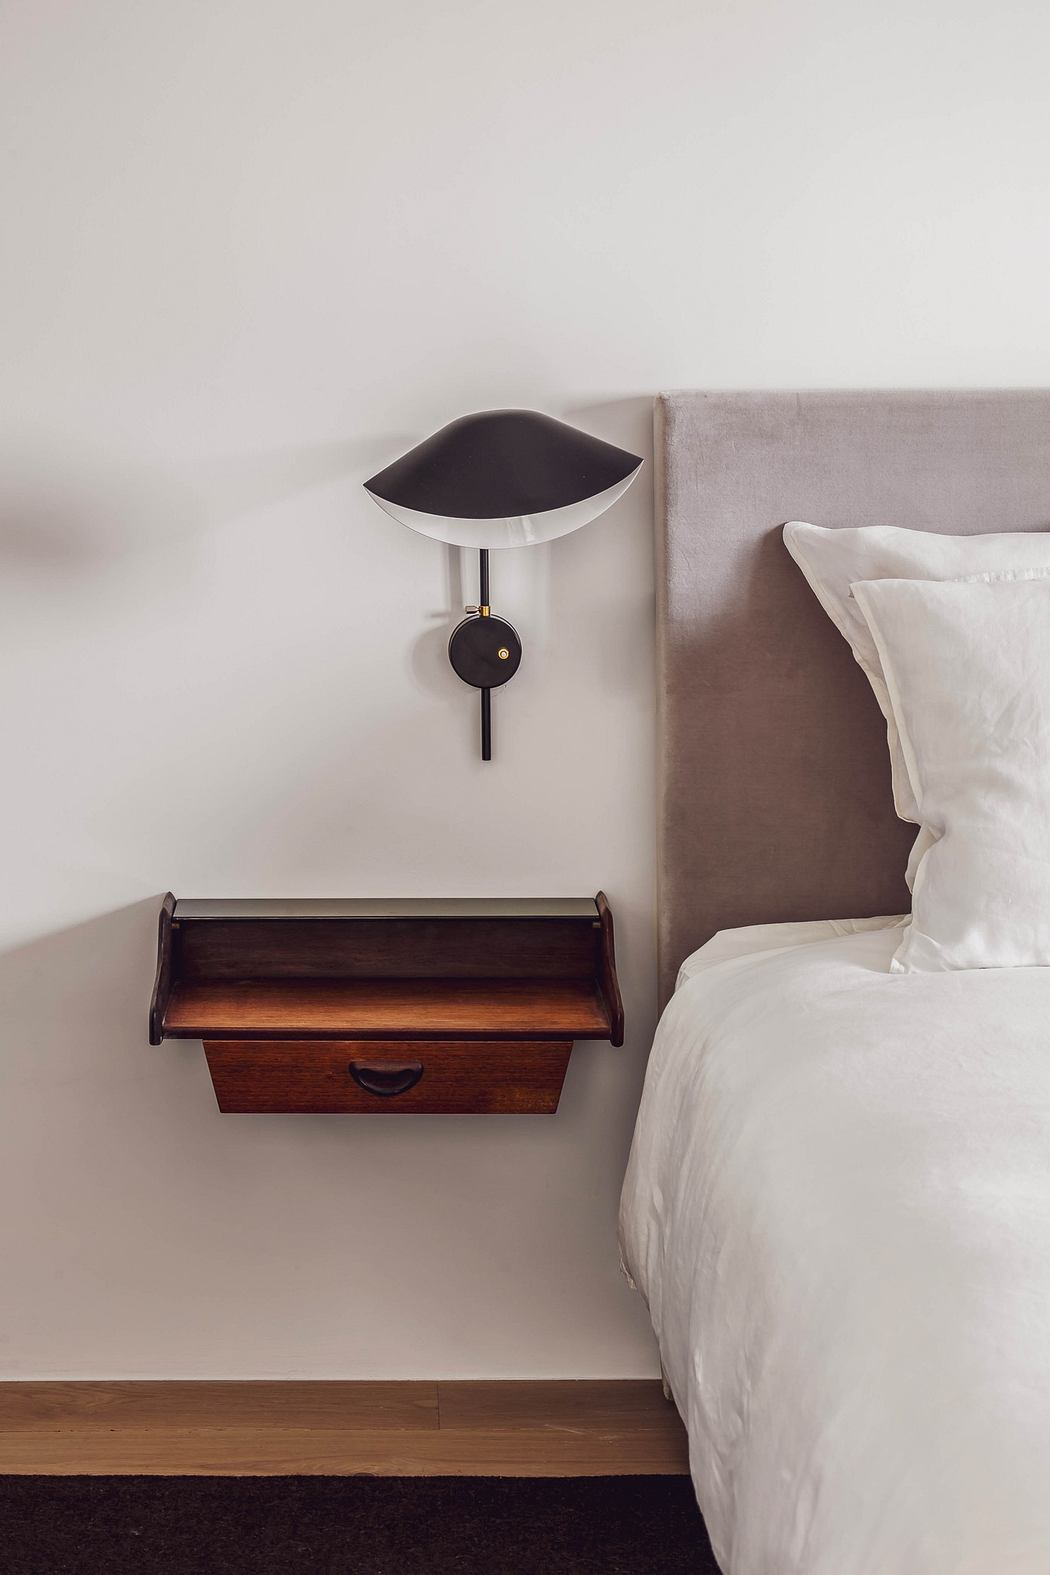 Minimalist bedroom detail with a wall-mounted bedside lamp and wooden drawer.